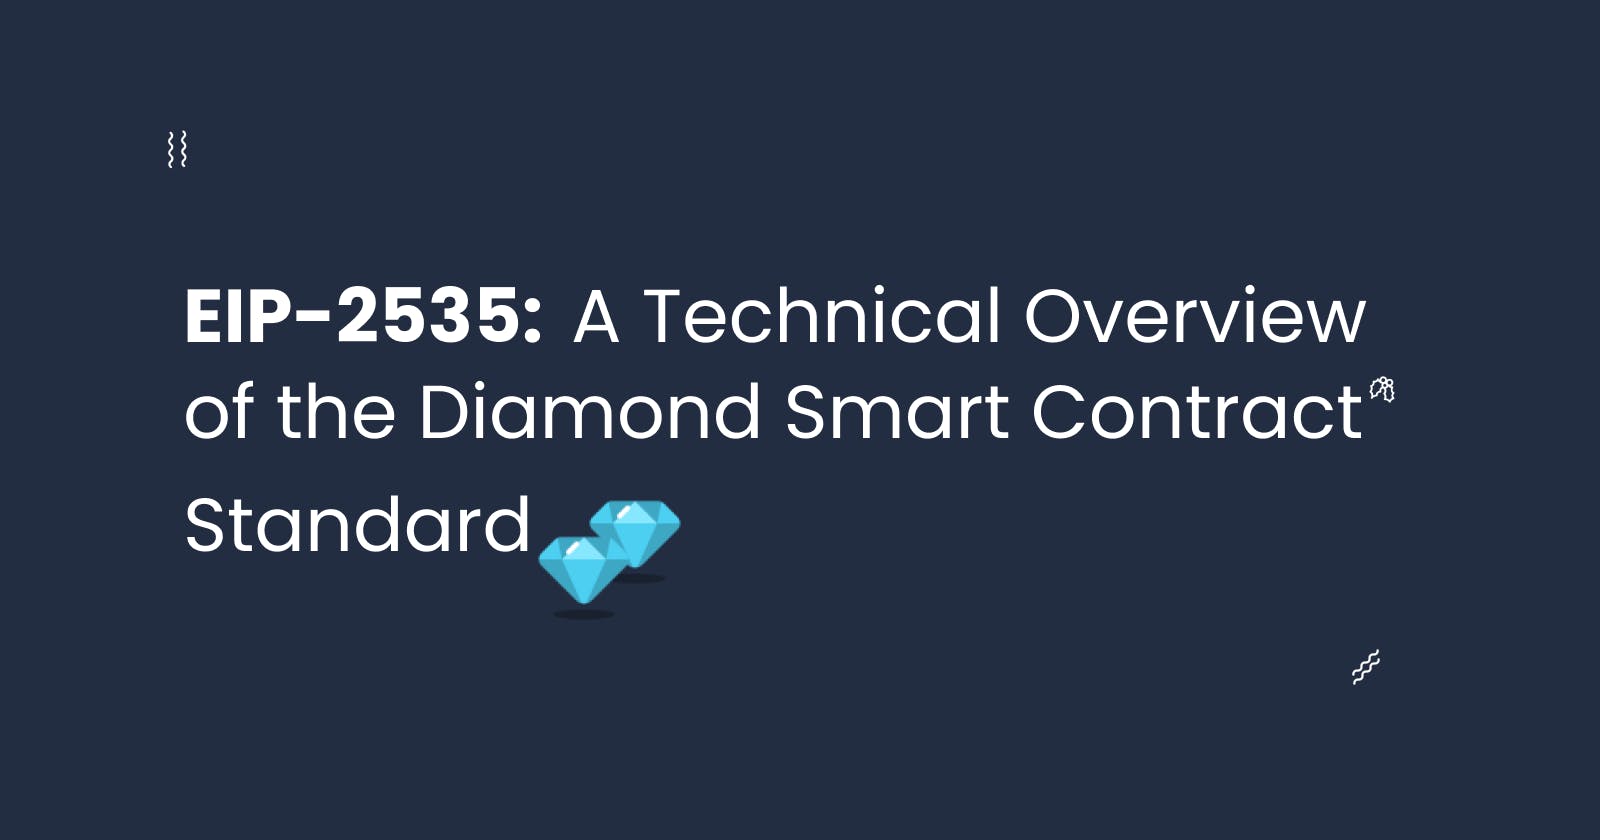 EIP-2535: A Technical Overview of the Diamond Smart Contract Standard